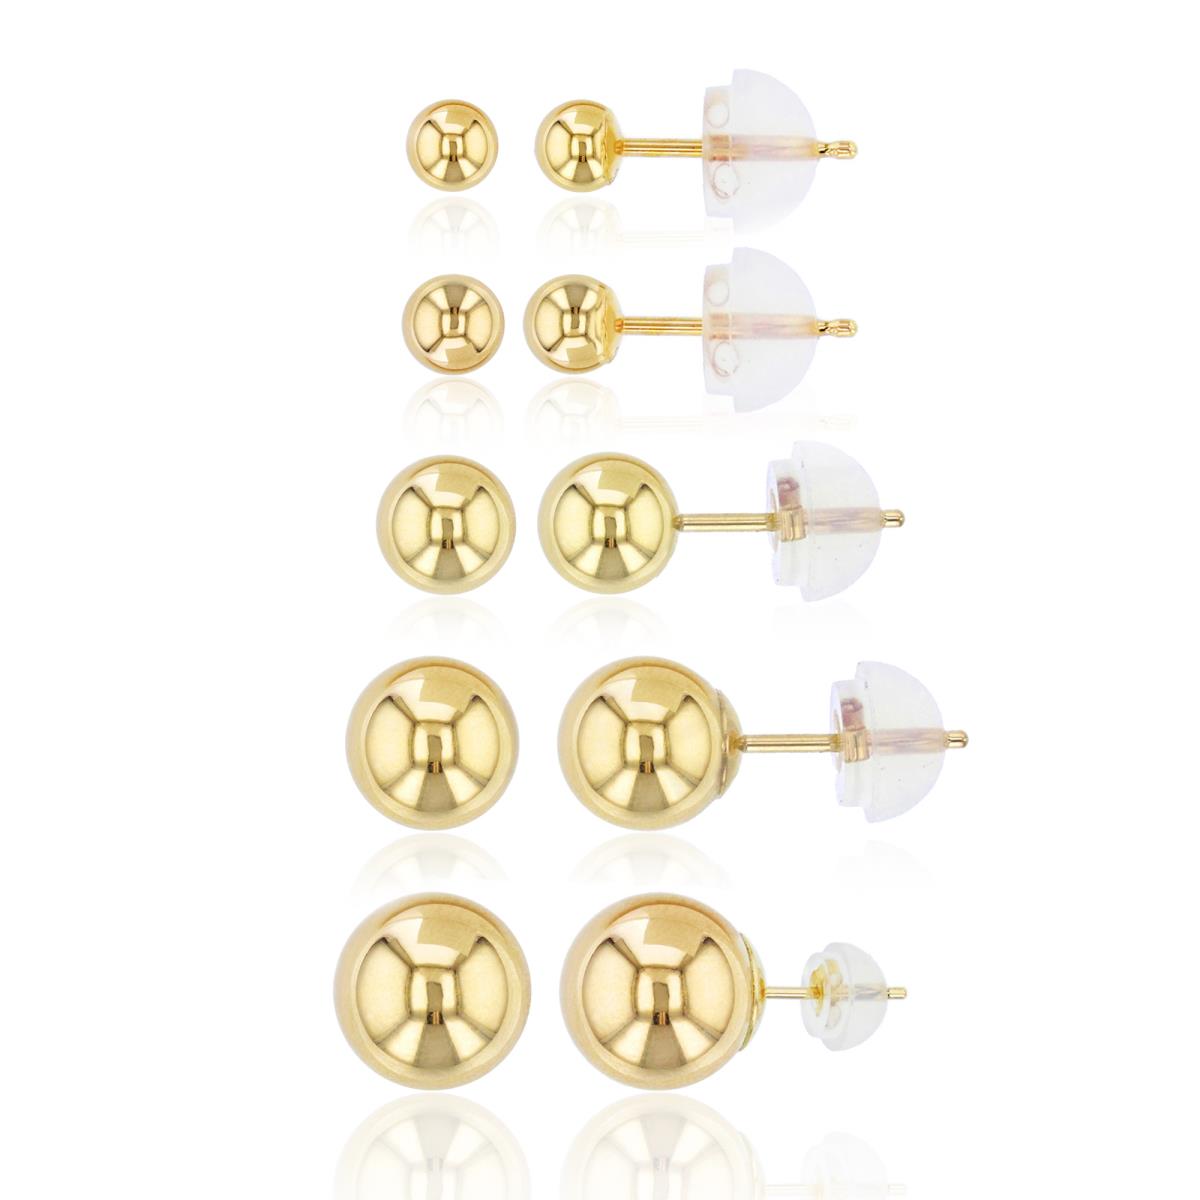 14K Gold Yellow 3,4,5,6,7MM Ball Stud Set with 14K Silicone Backs